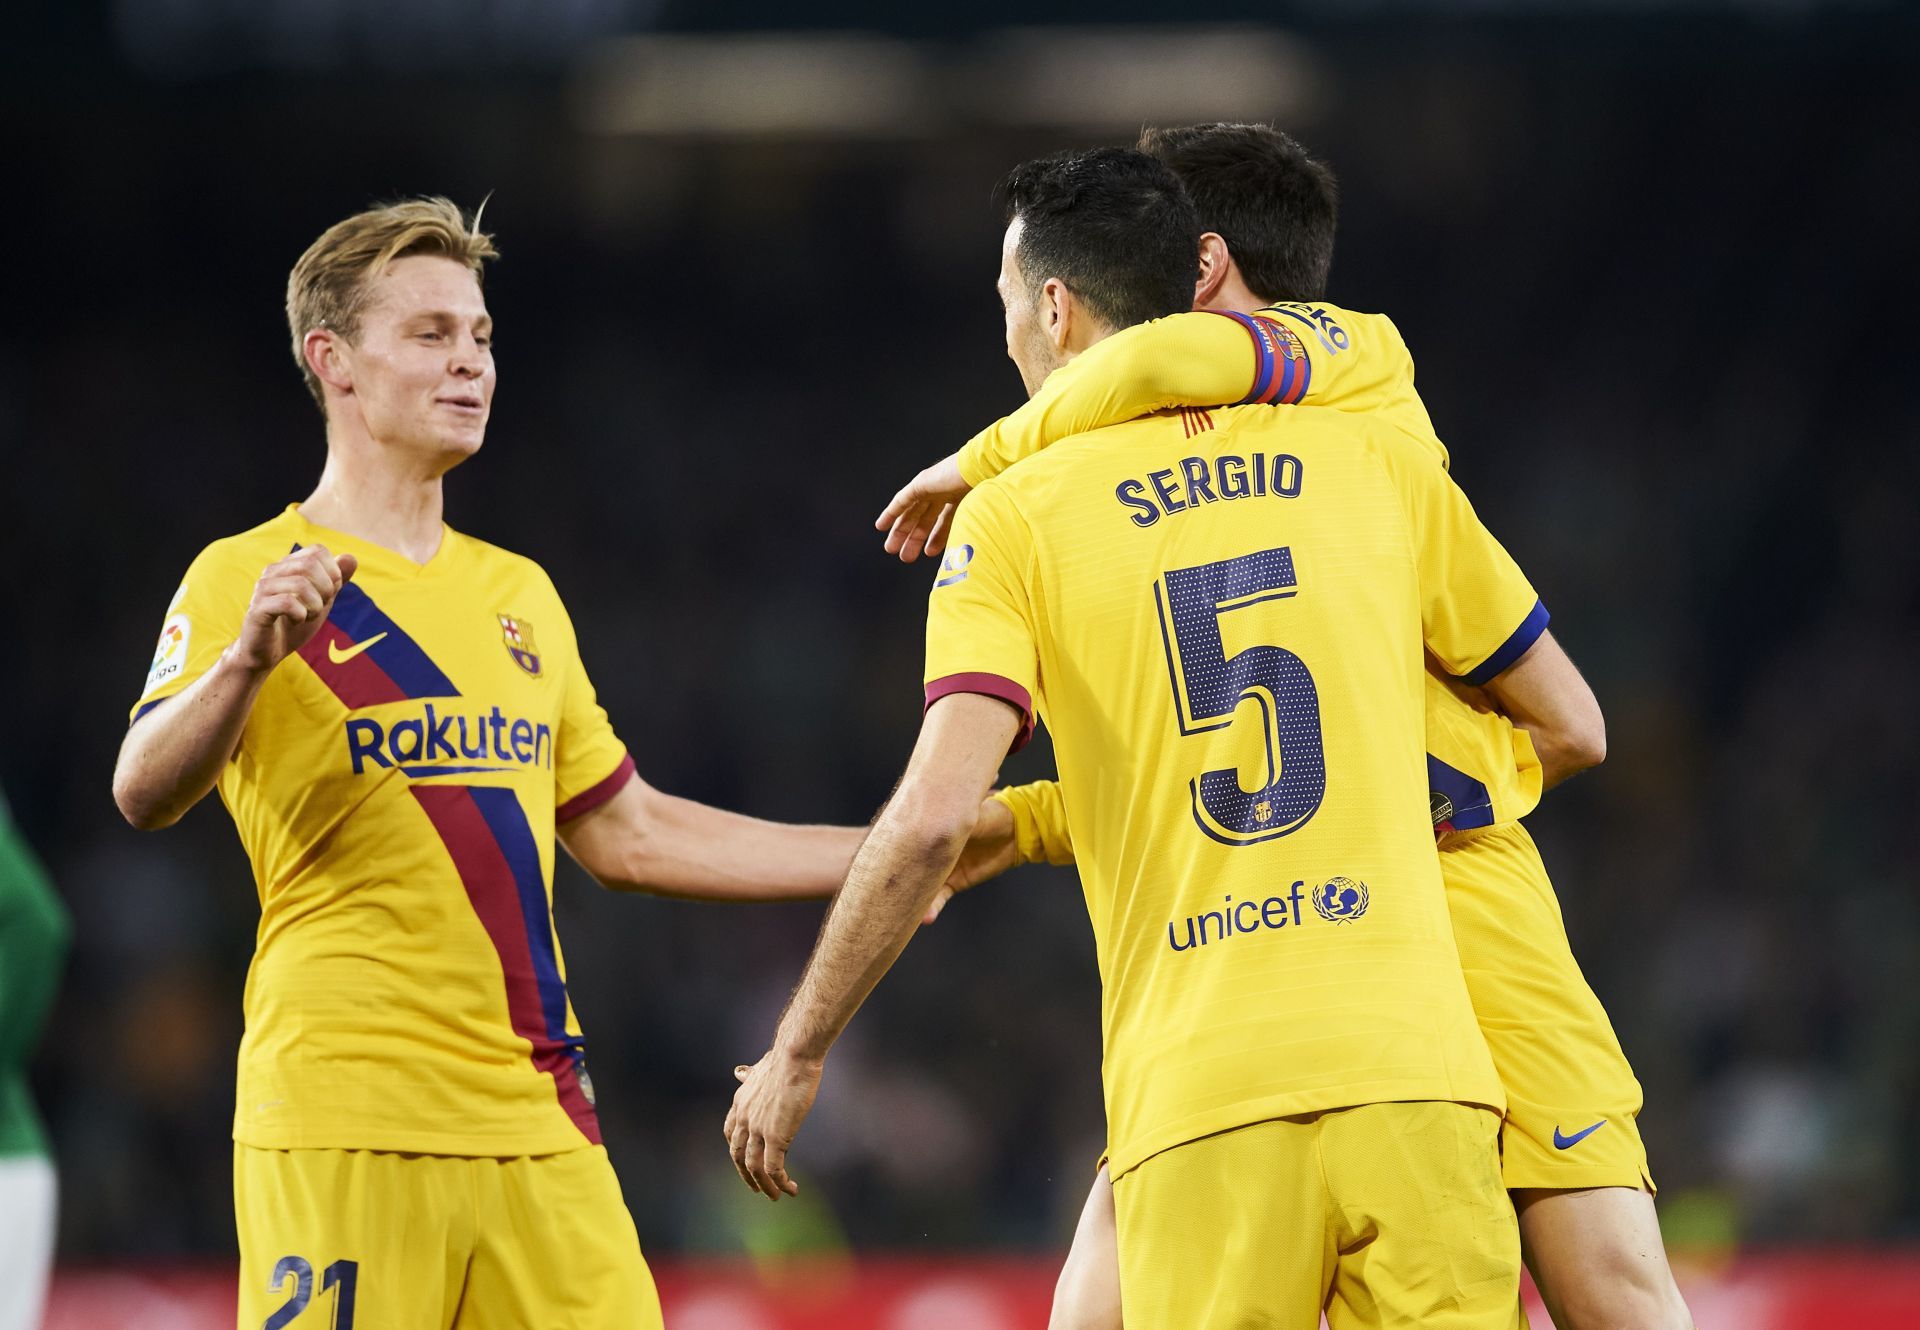 Barcelona have the finest young midfielders in world football right now